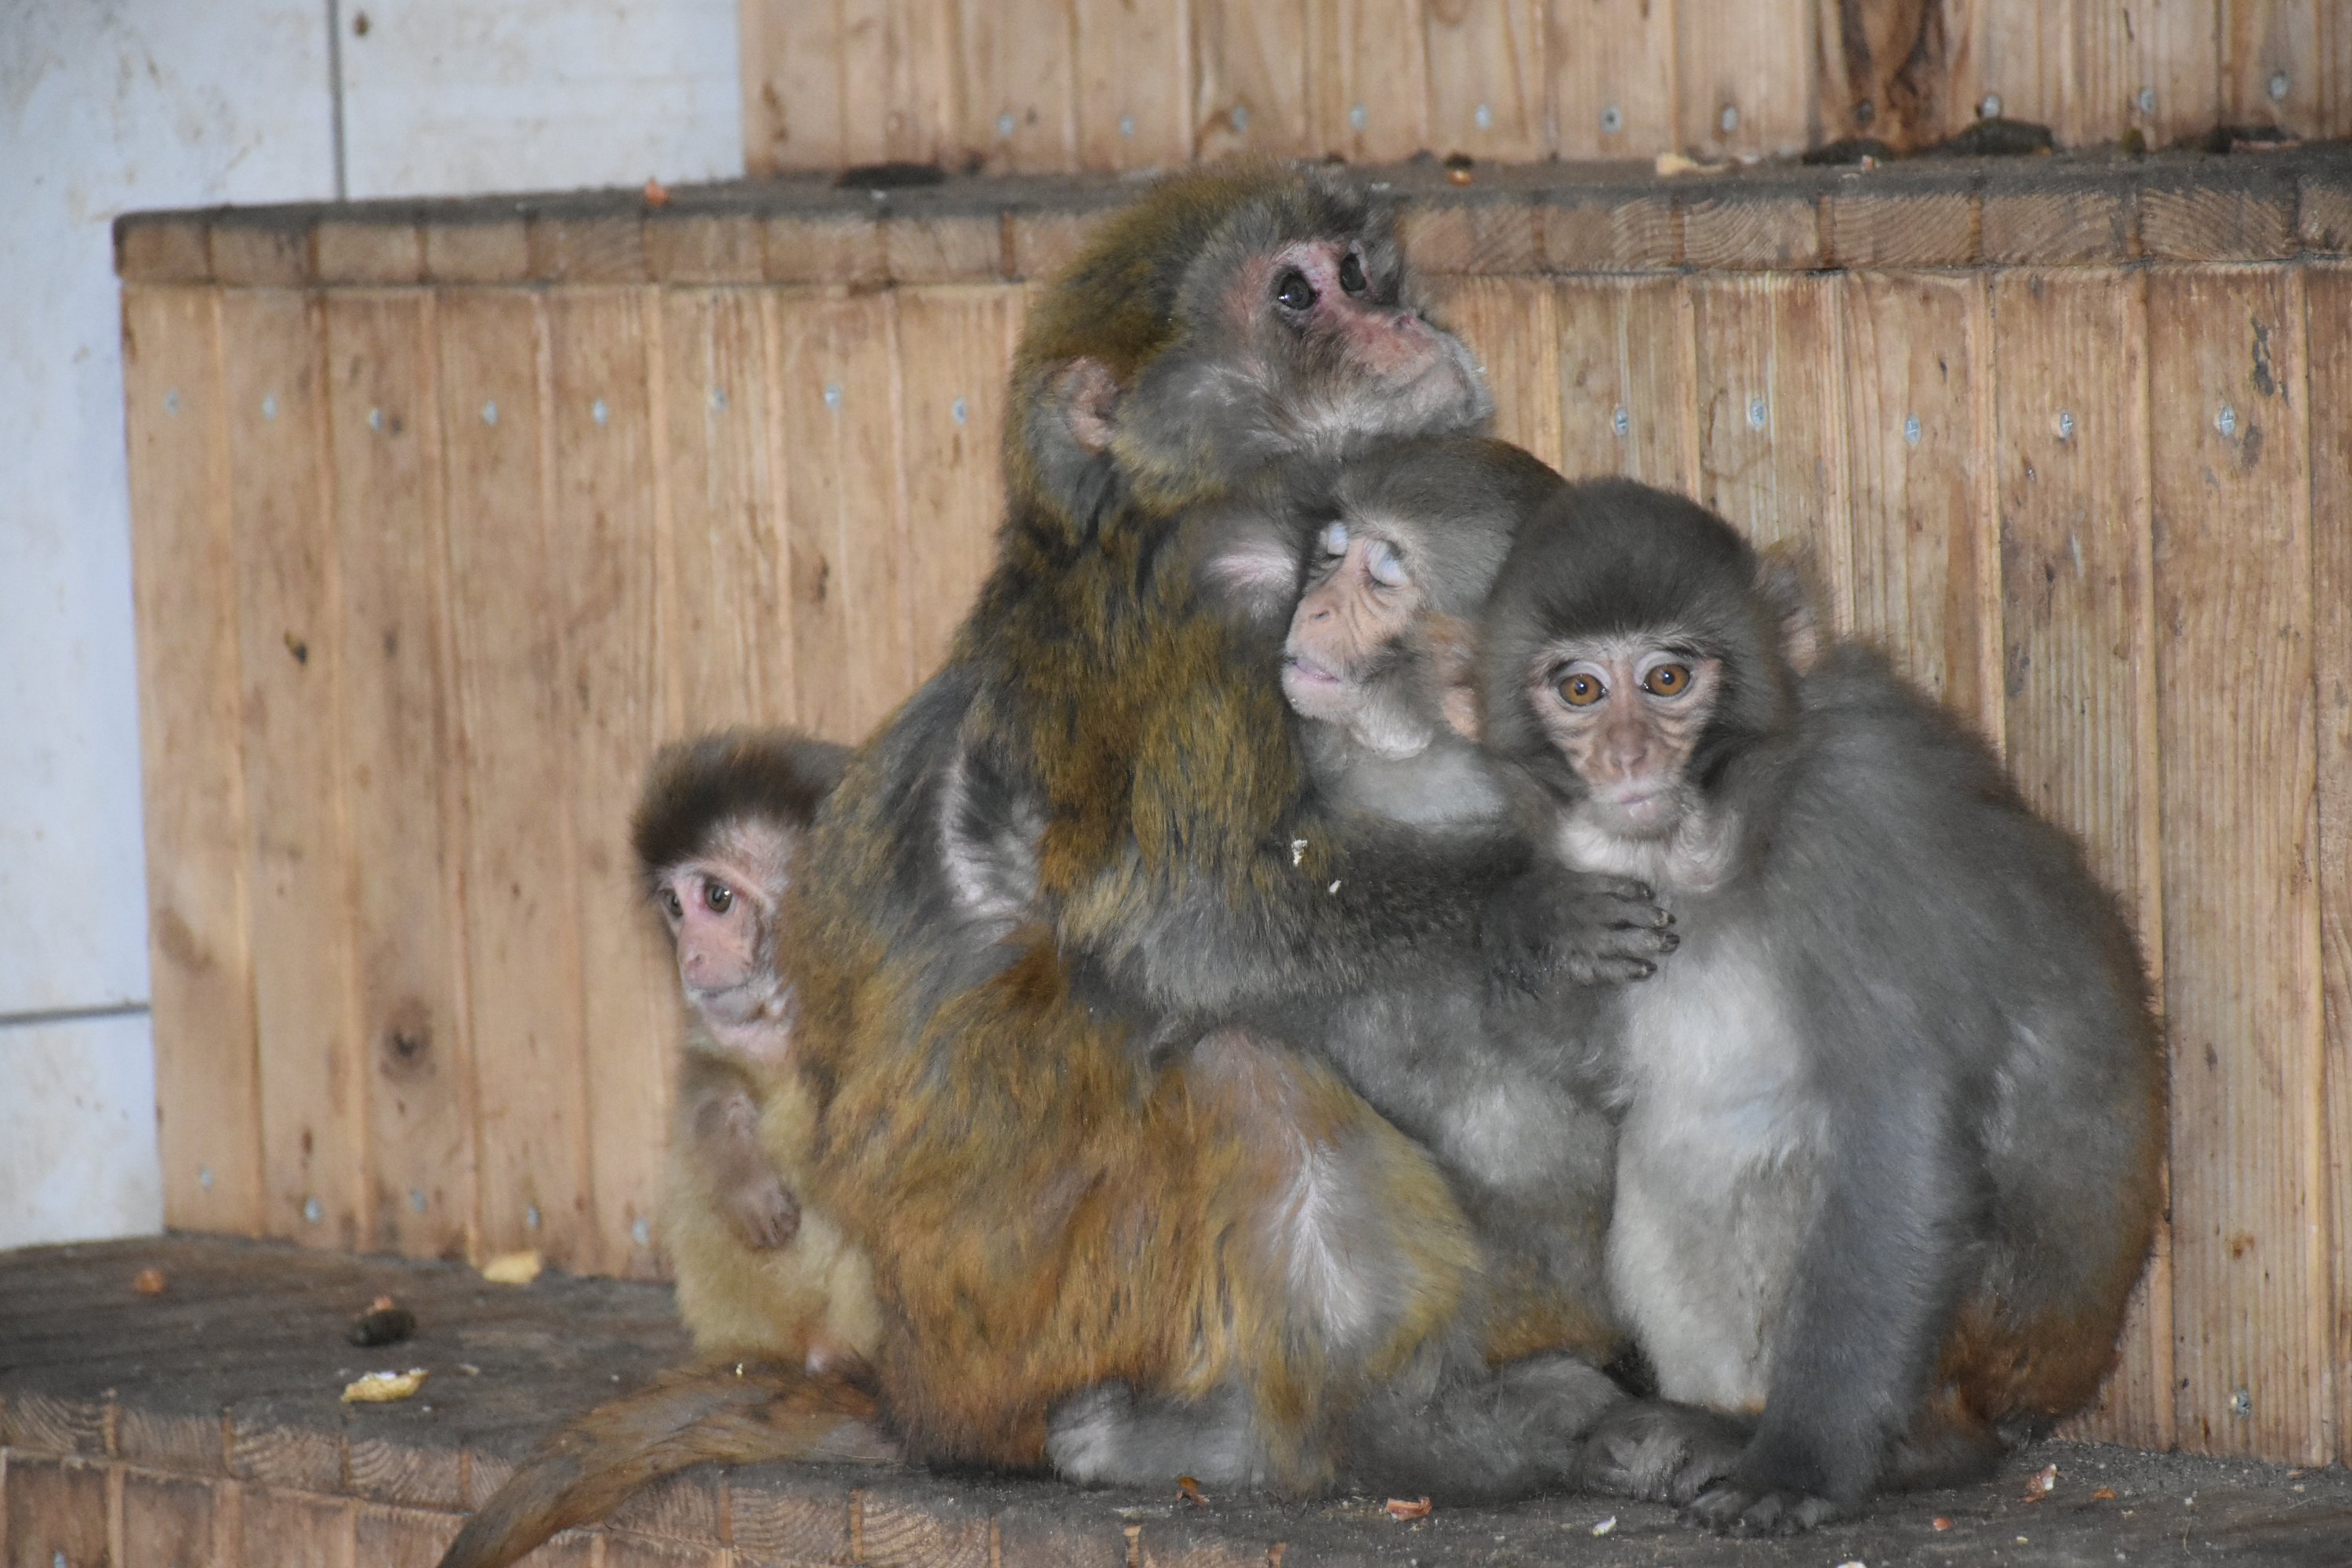 Smuggled macaques find refuge with monkey mom at Turkish zoo